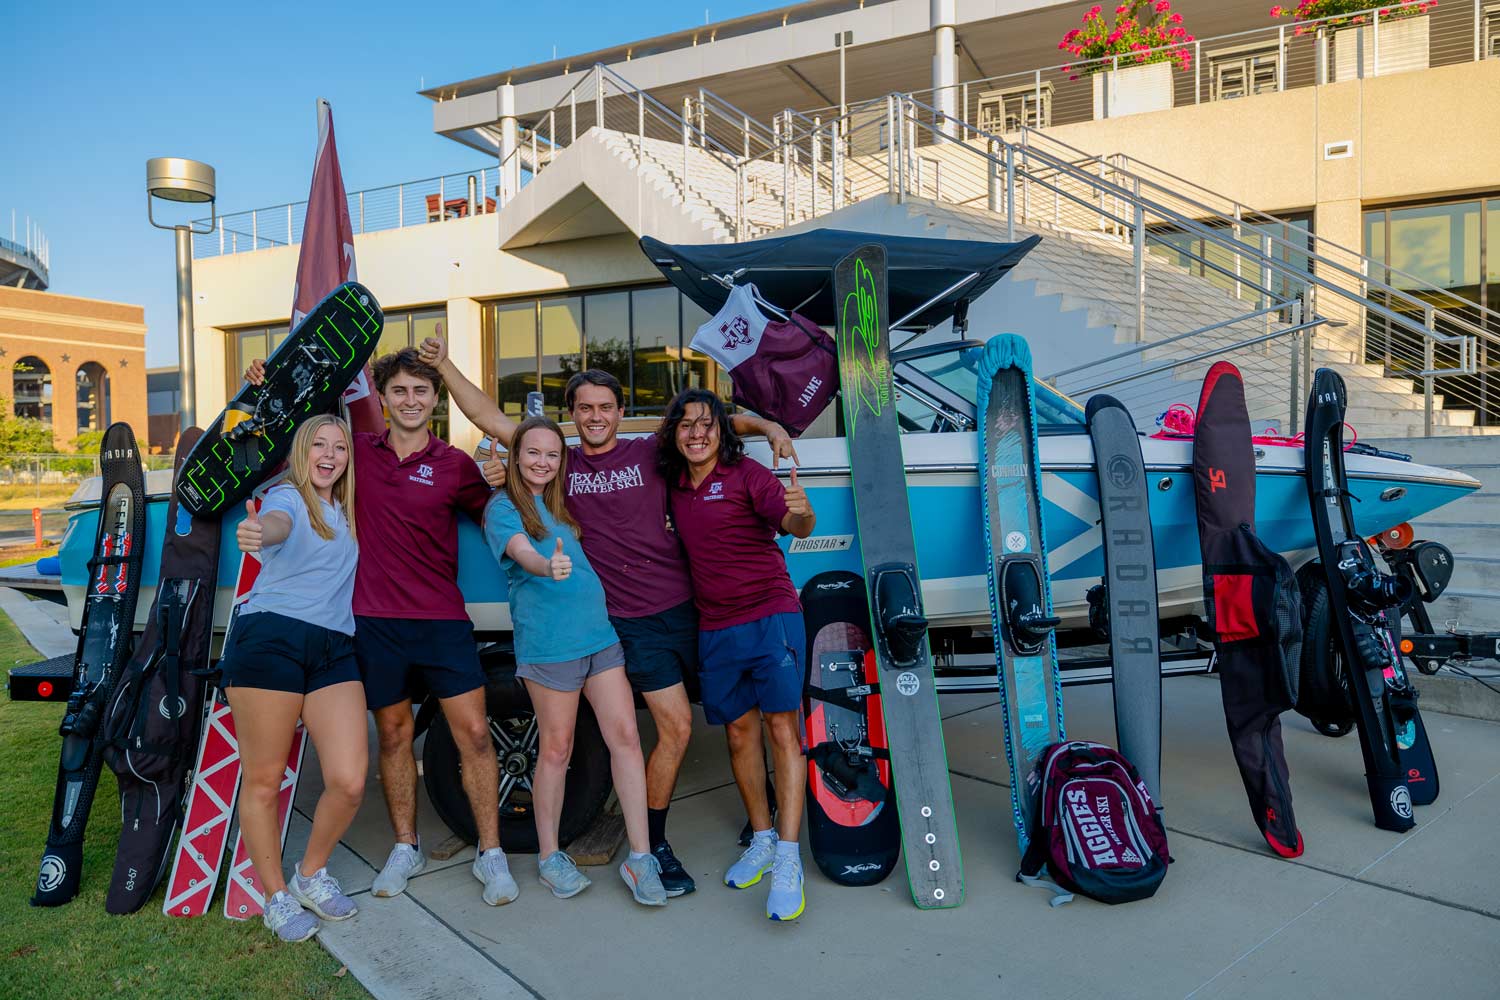 Students load up water skiing gear to participate in an Outdoor Adventures trip